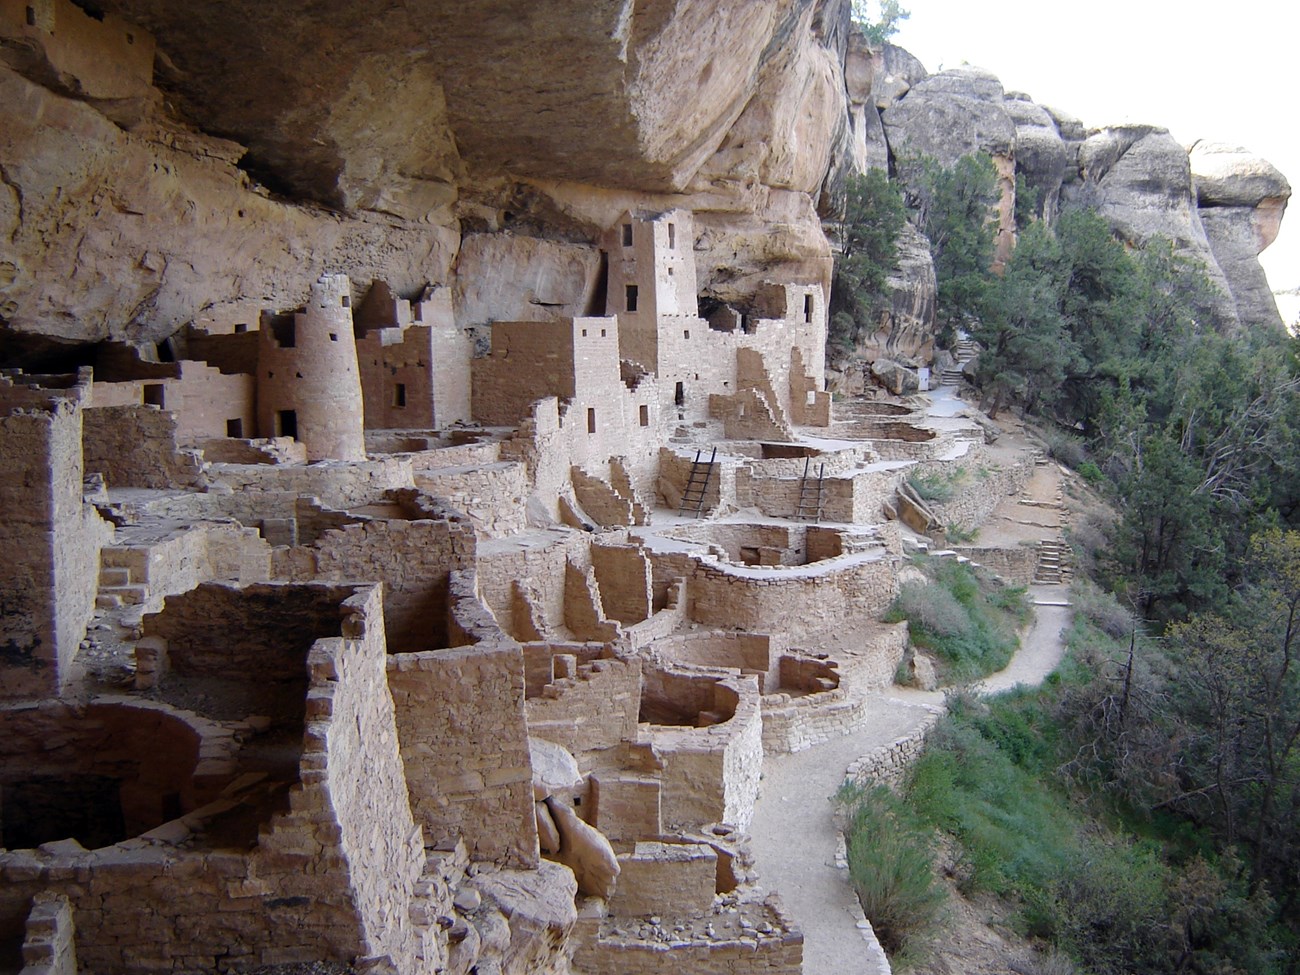 A collection of sand-colored buildings and walls with stairs and ladders is built under an overhanding cliff